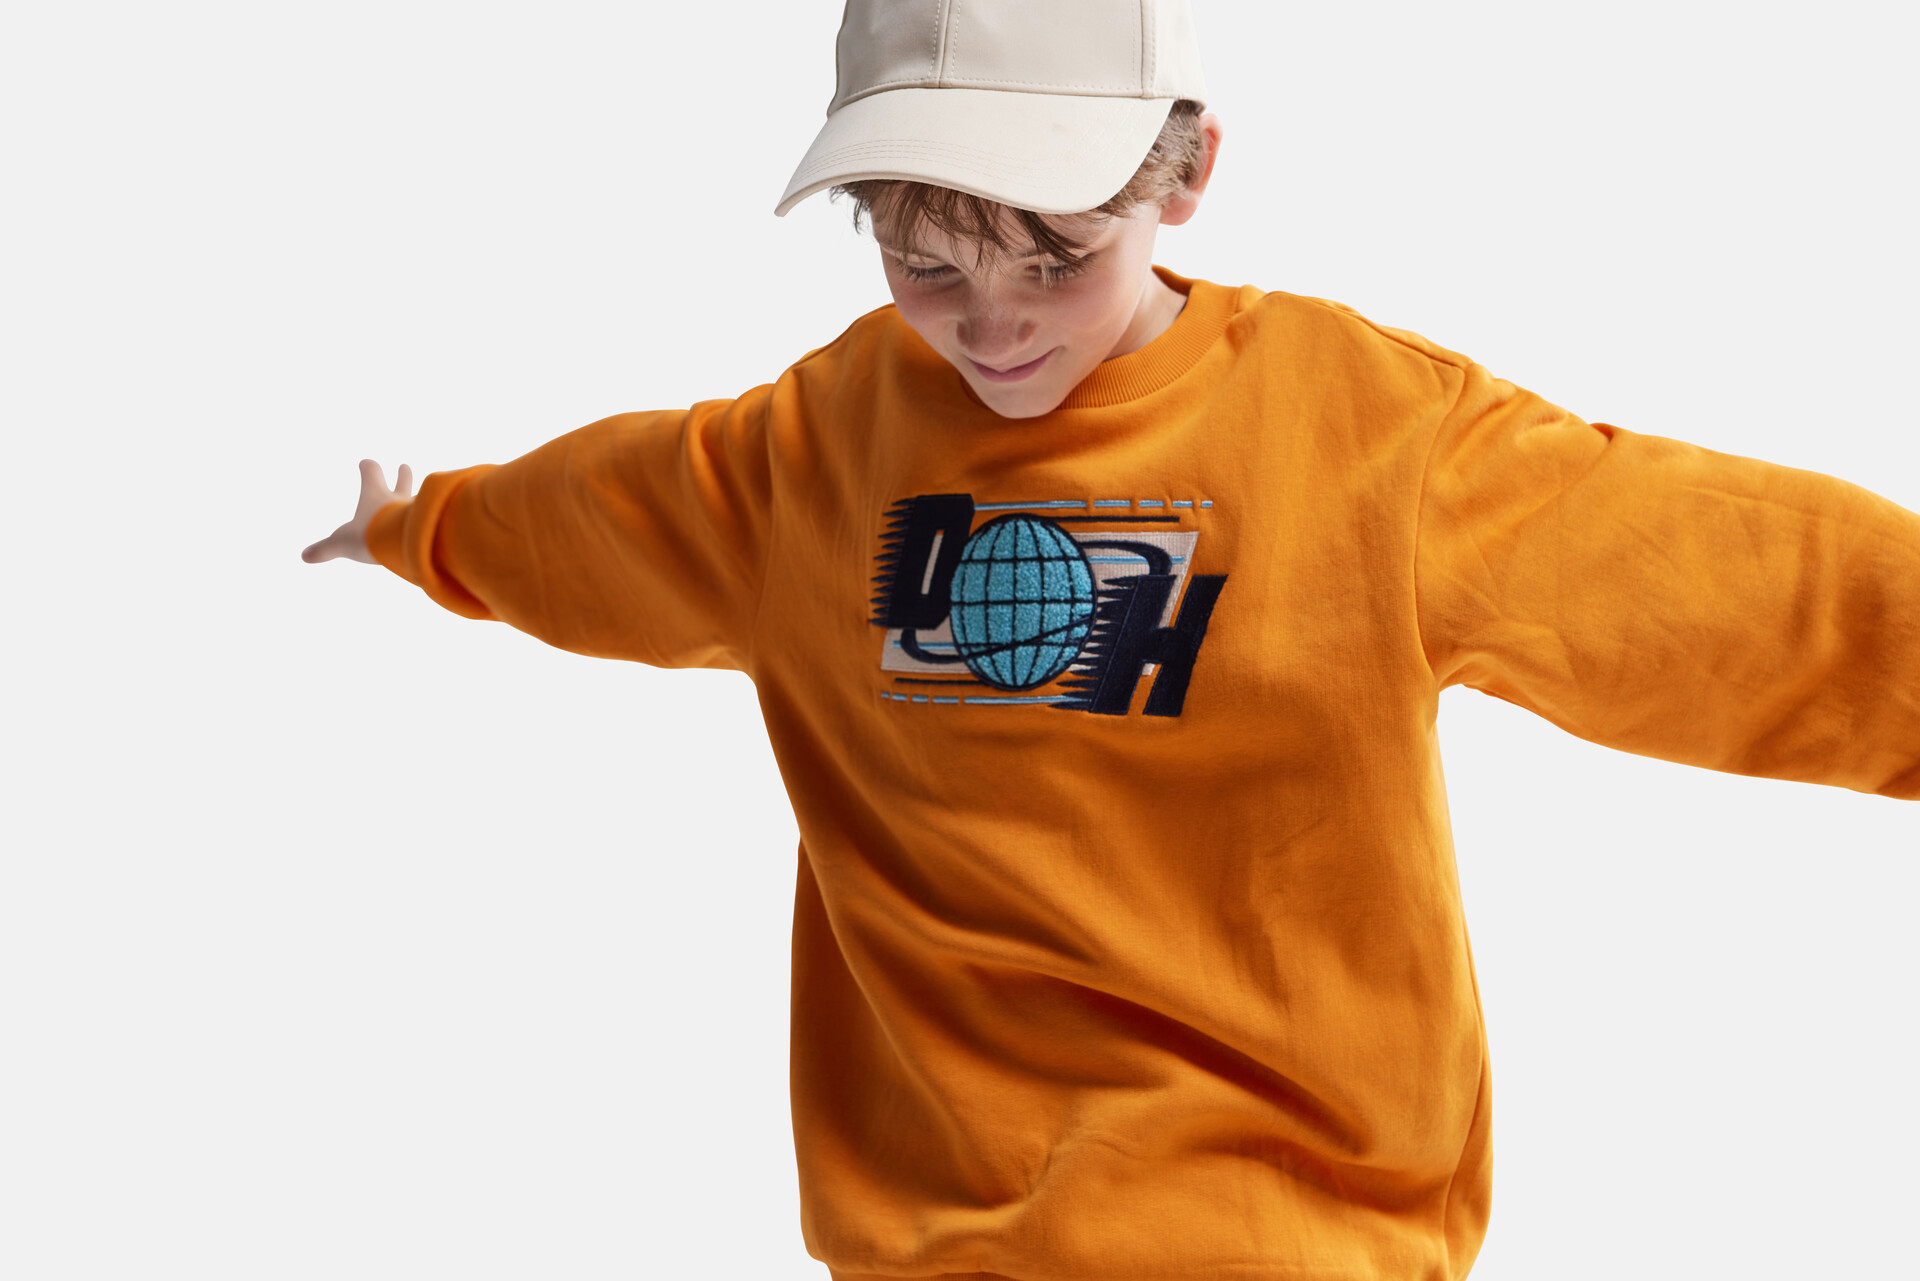 Pullover By Dylan SHOEBY BOYS